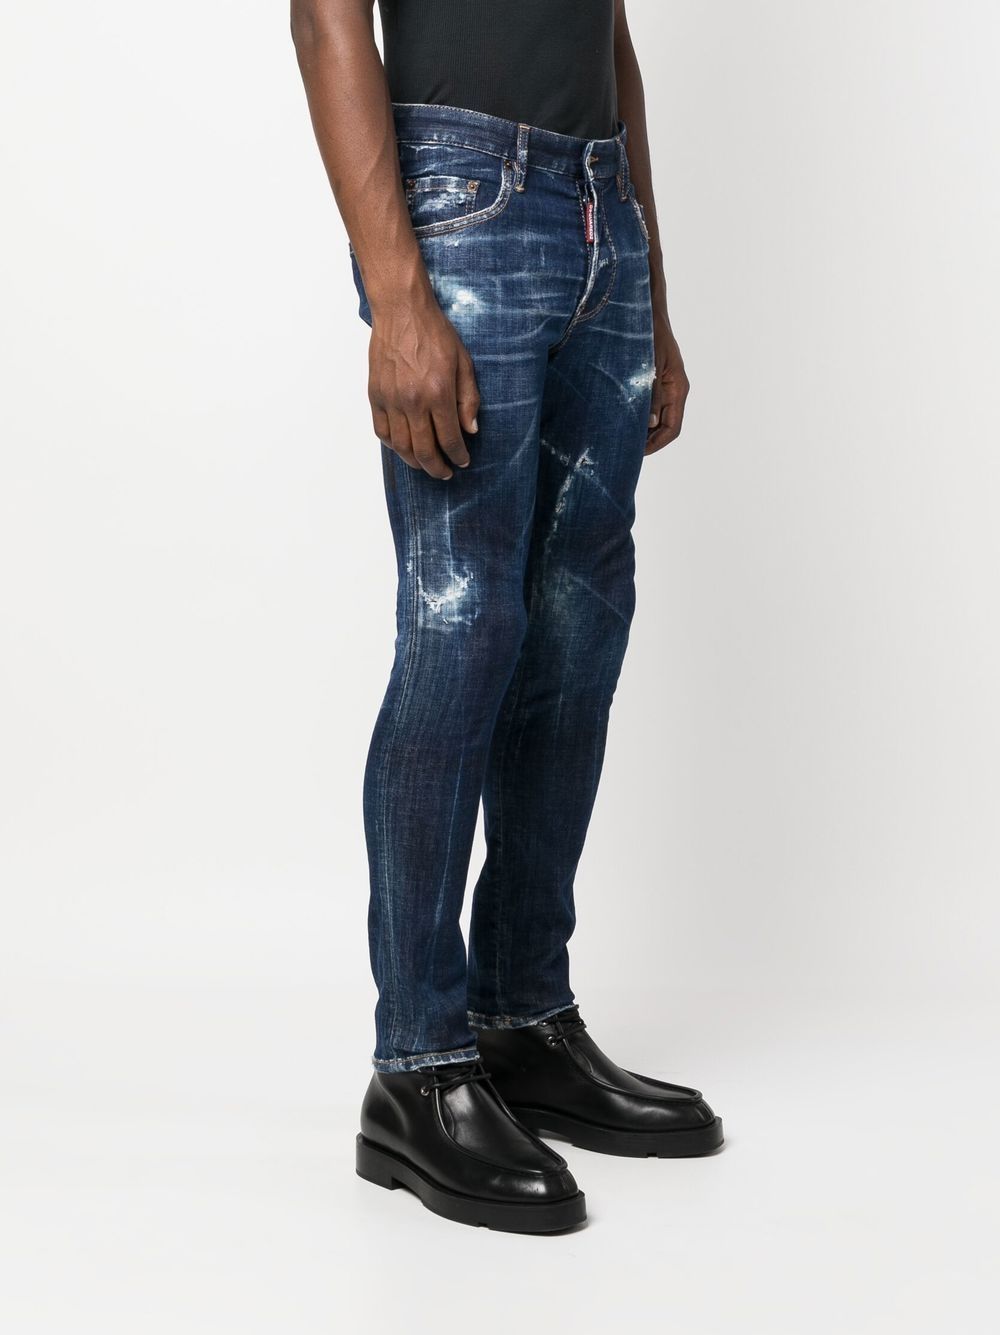 DSQUARED2 Distressed Skinny-Cut Jeans for Chic Men's Style - SS23 Collection